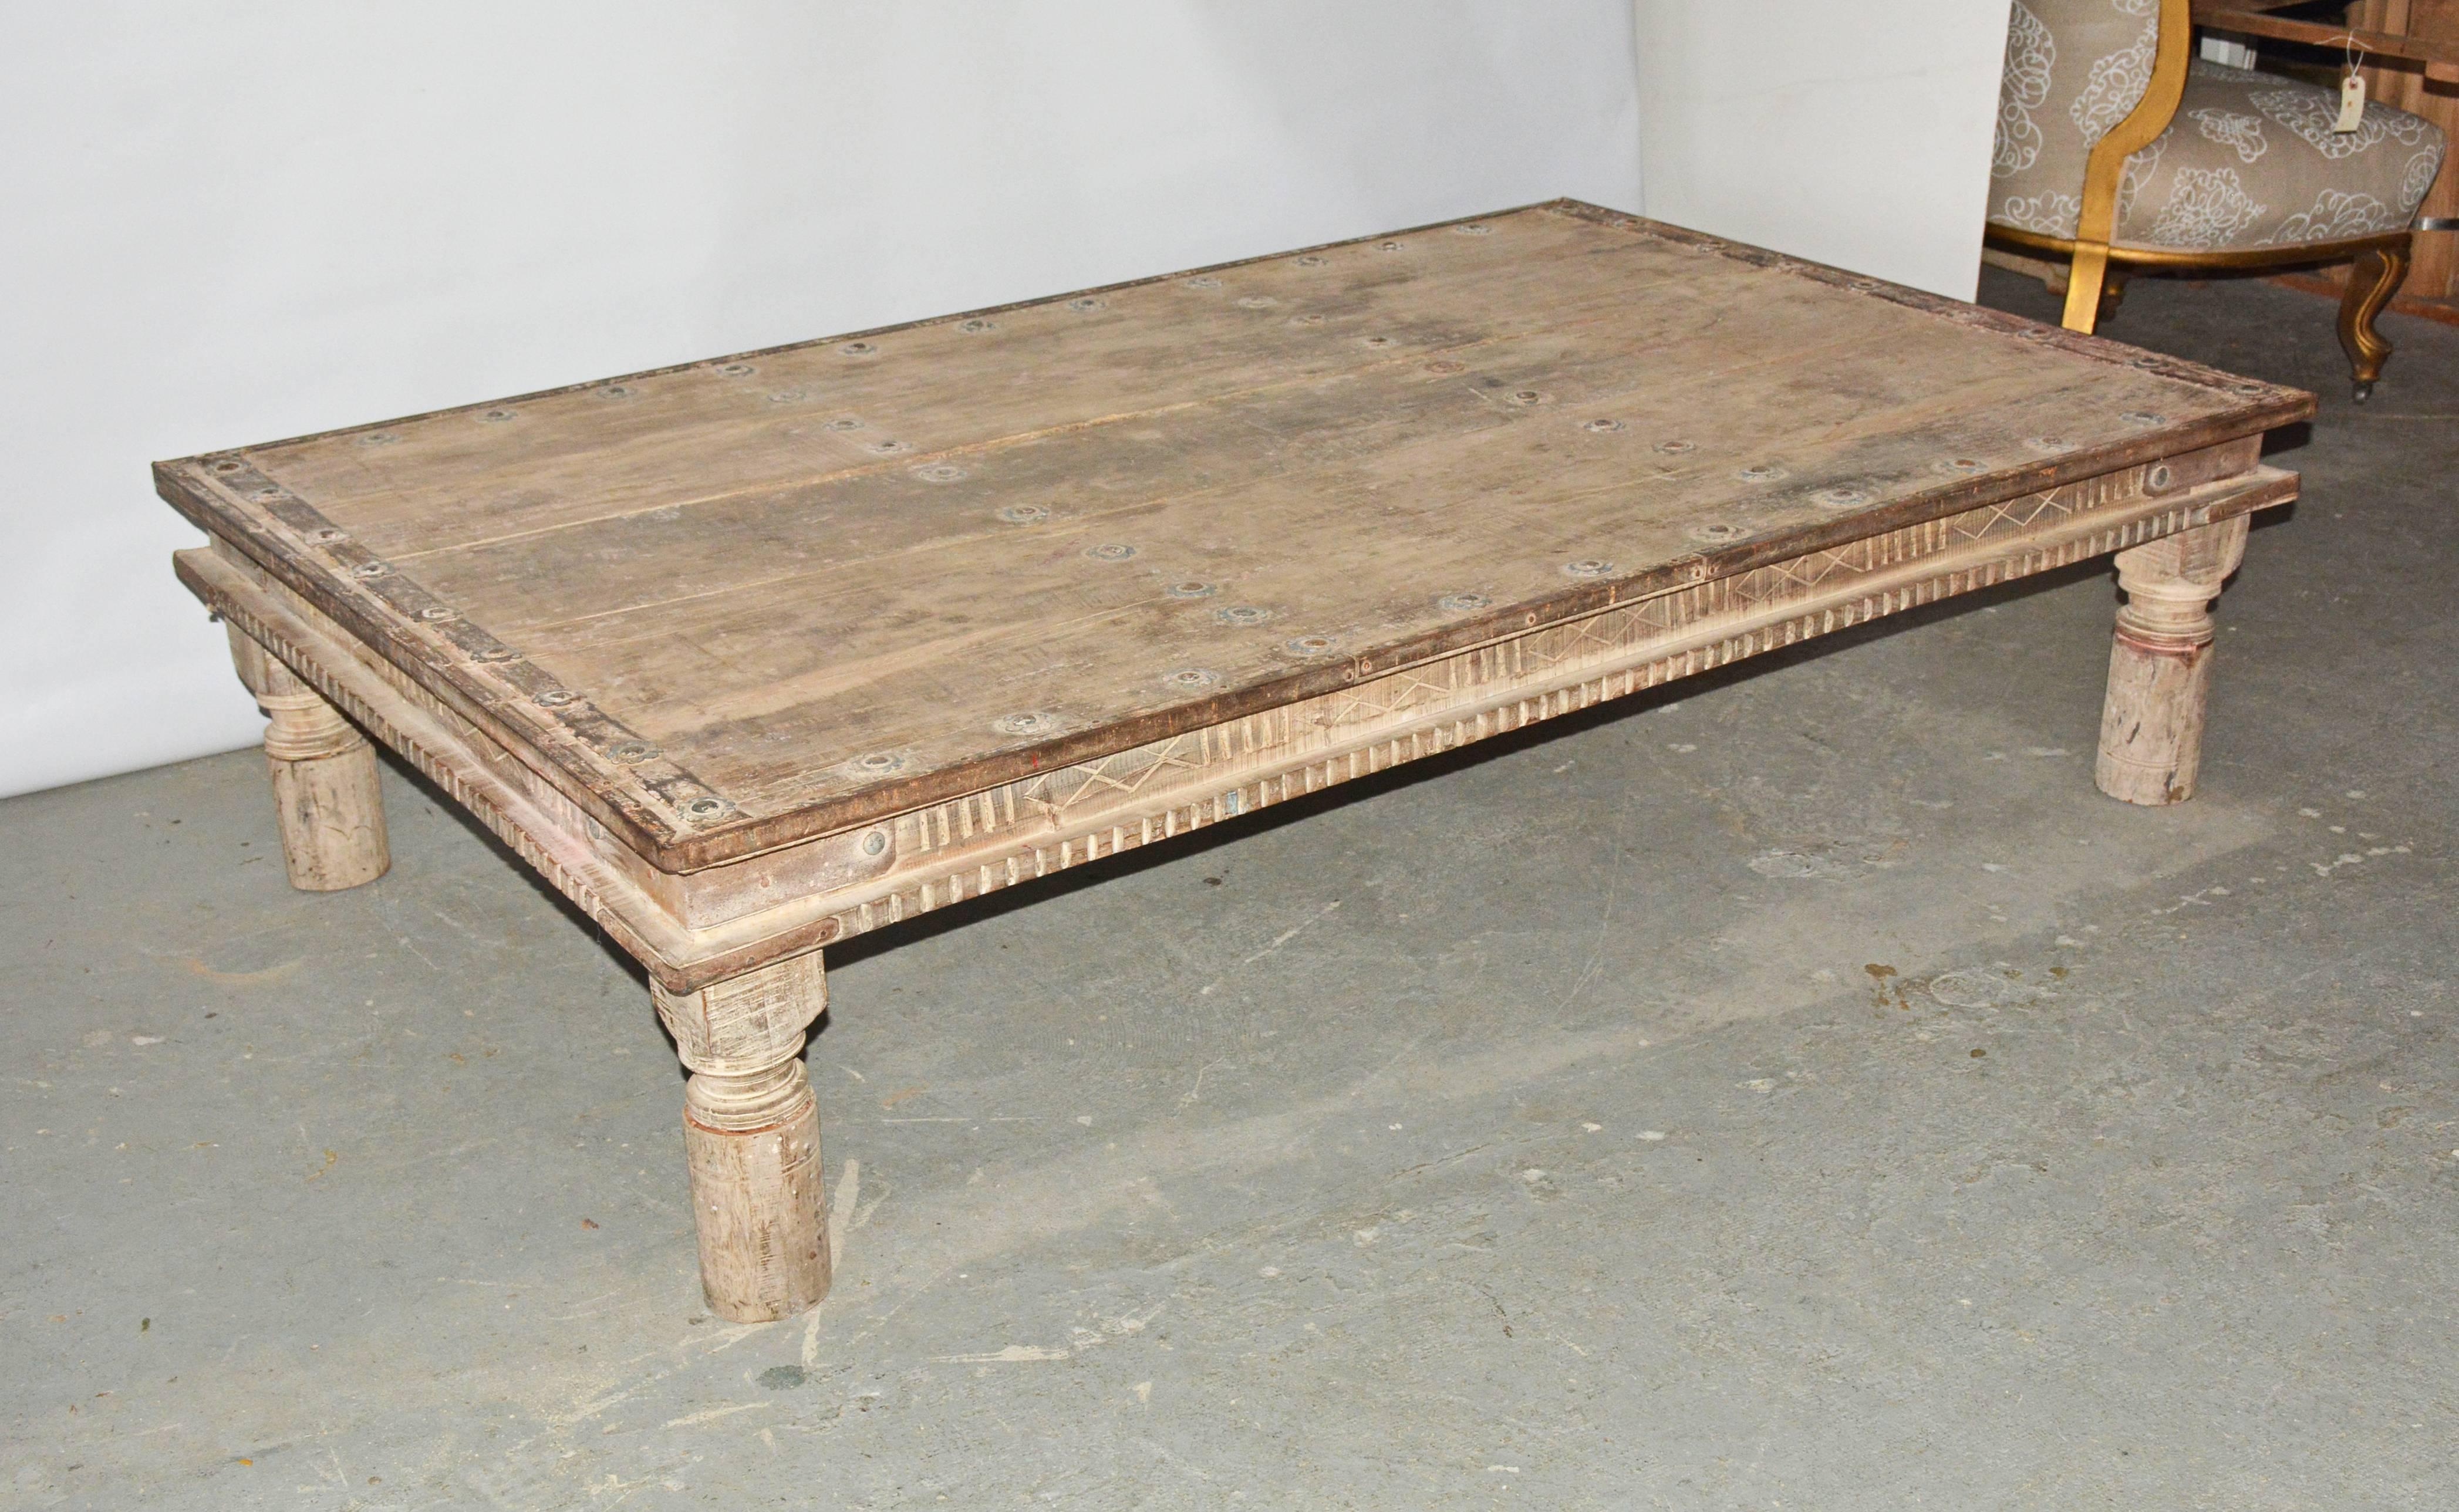 Impressive hand-carved coffee table made with hardwood planks with large iron decorations. Four shaped legs support this large rustic table. Table is in good antique condition with wear adding to its charm.